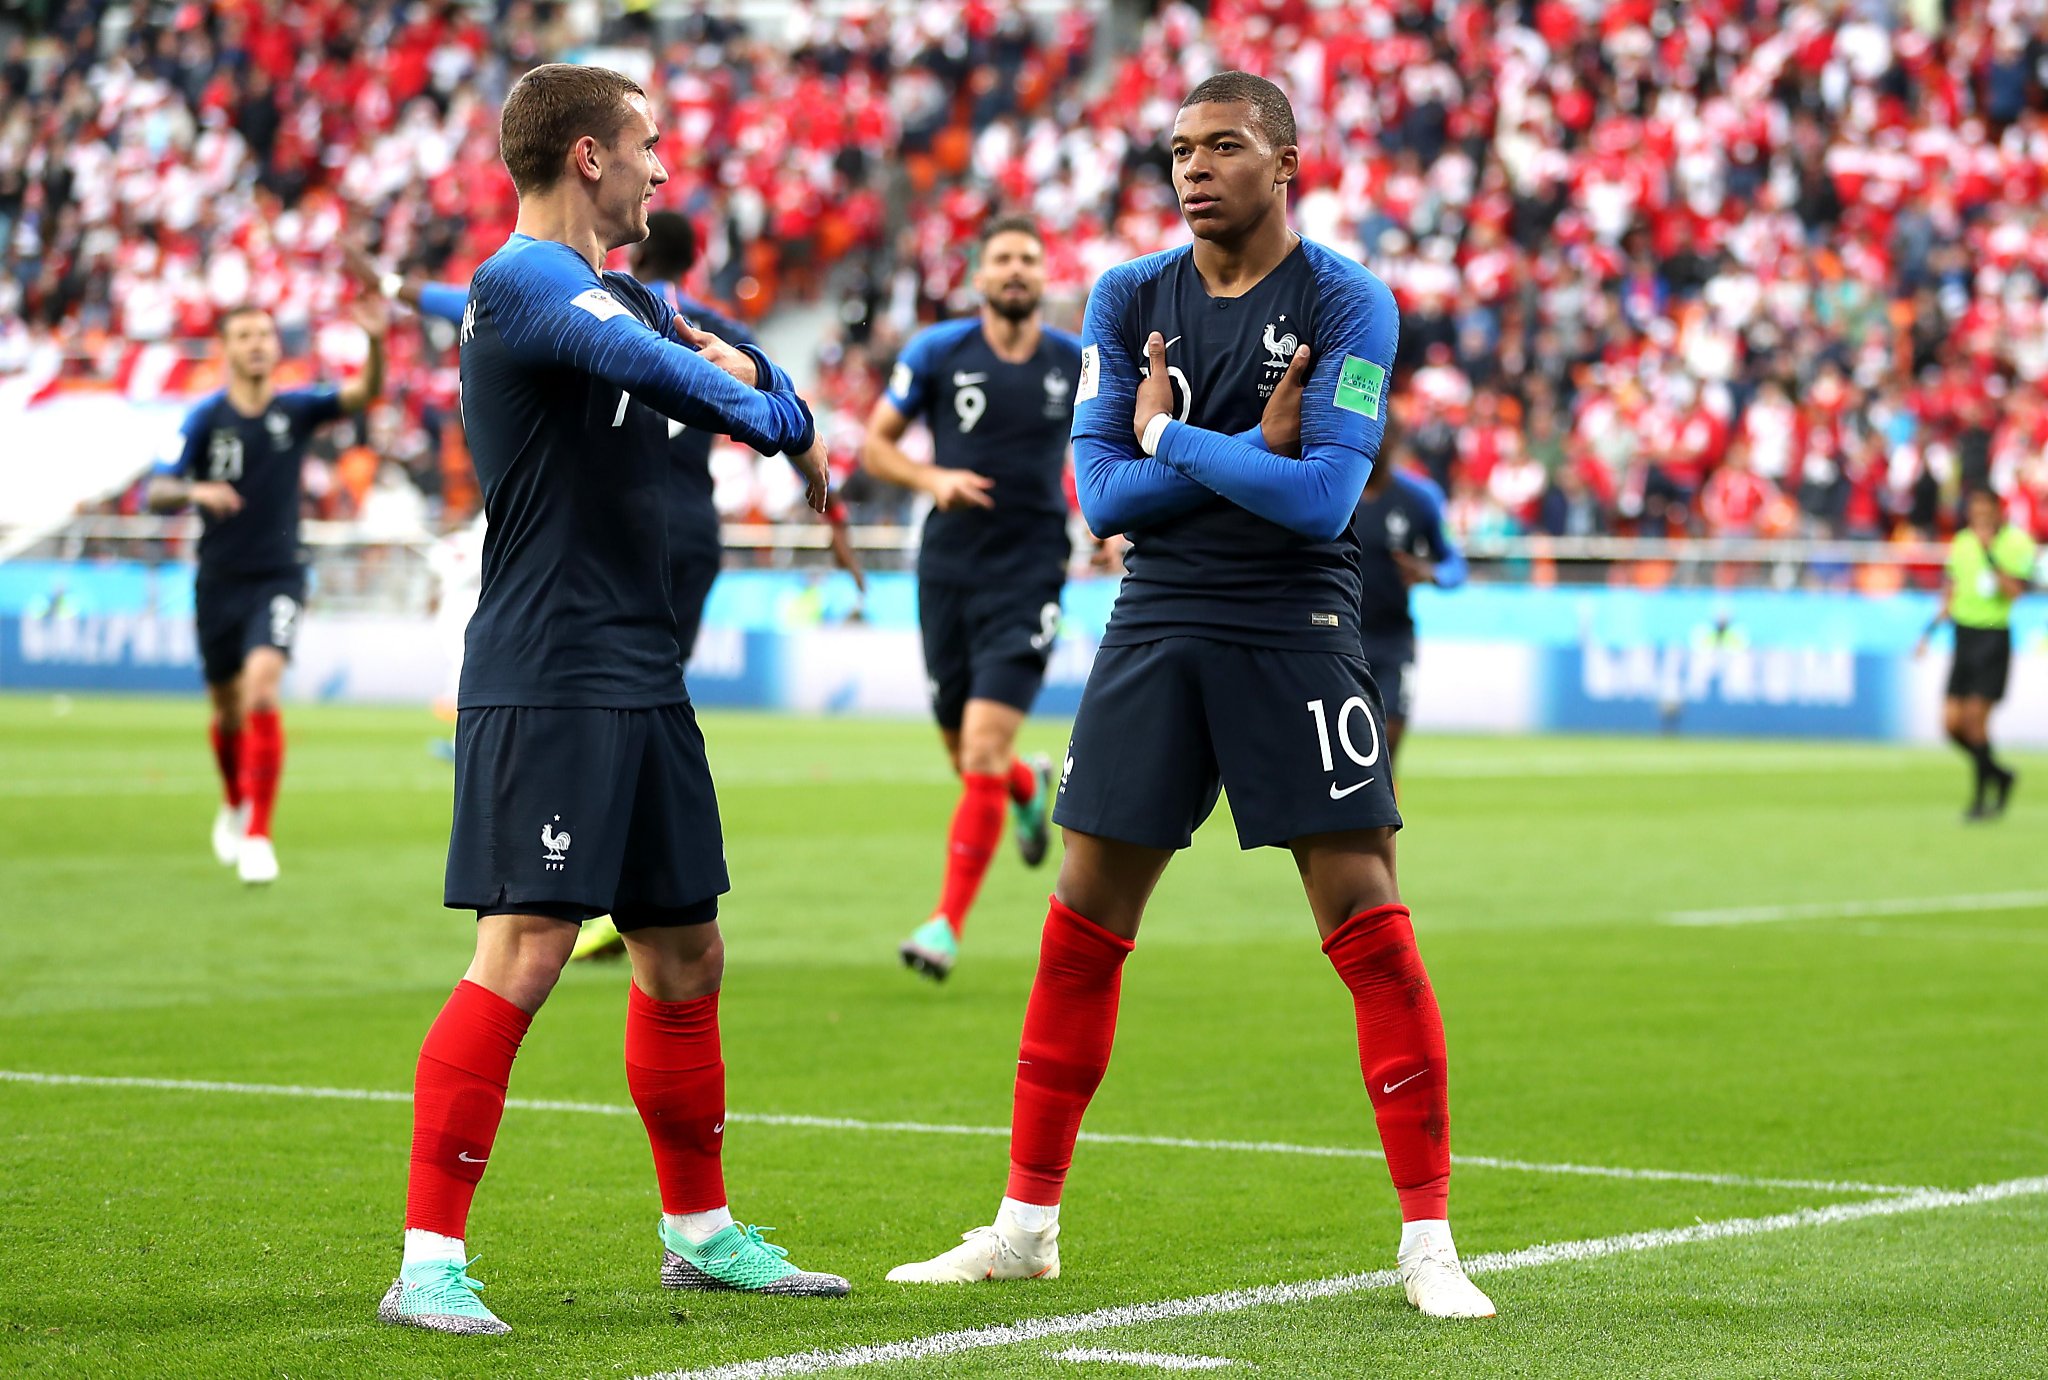 Mbappe sends France into second round with 1-0 win over Peru - Laredo